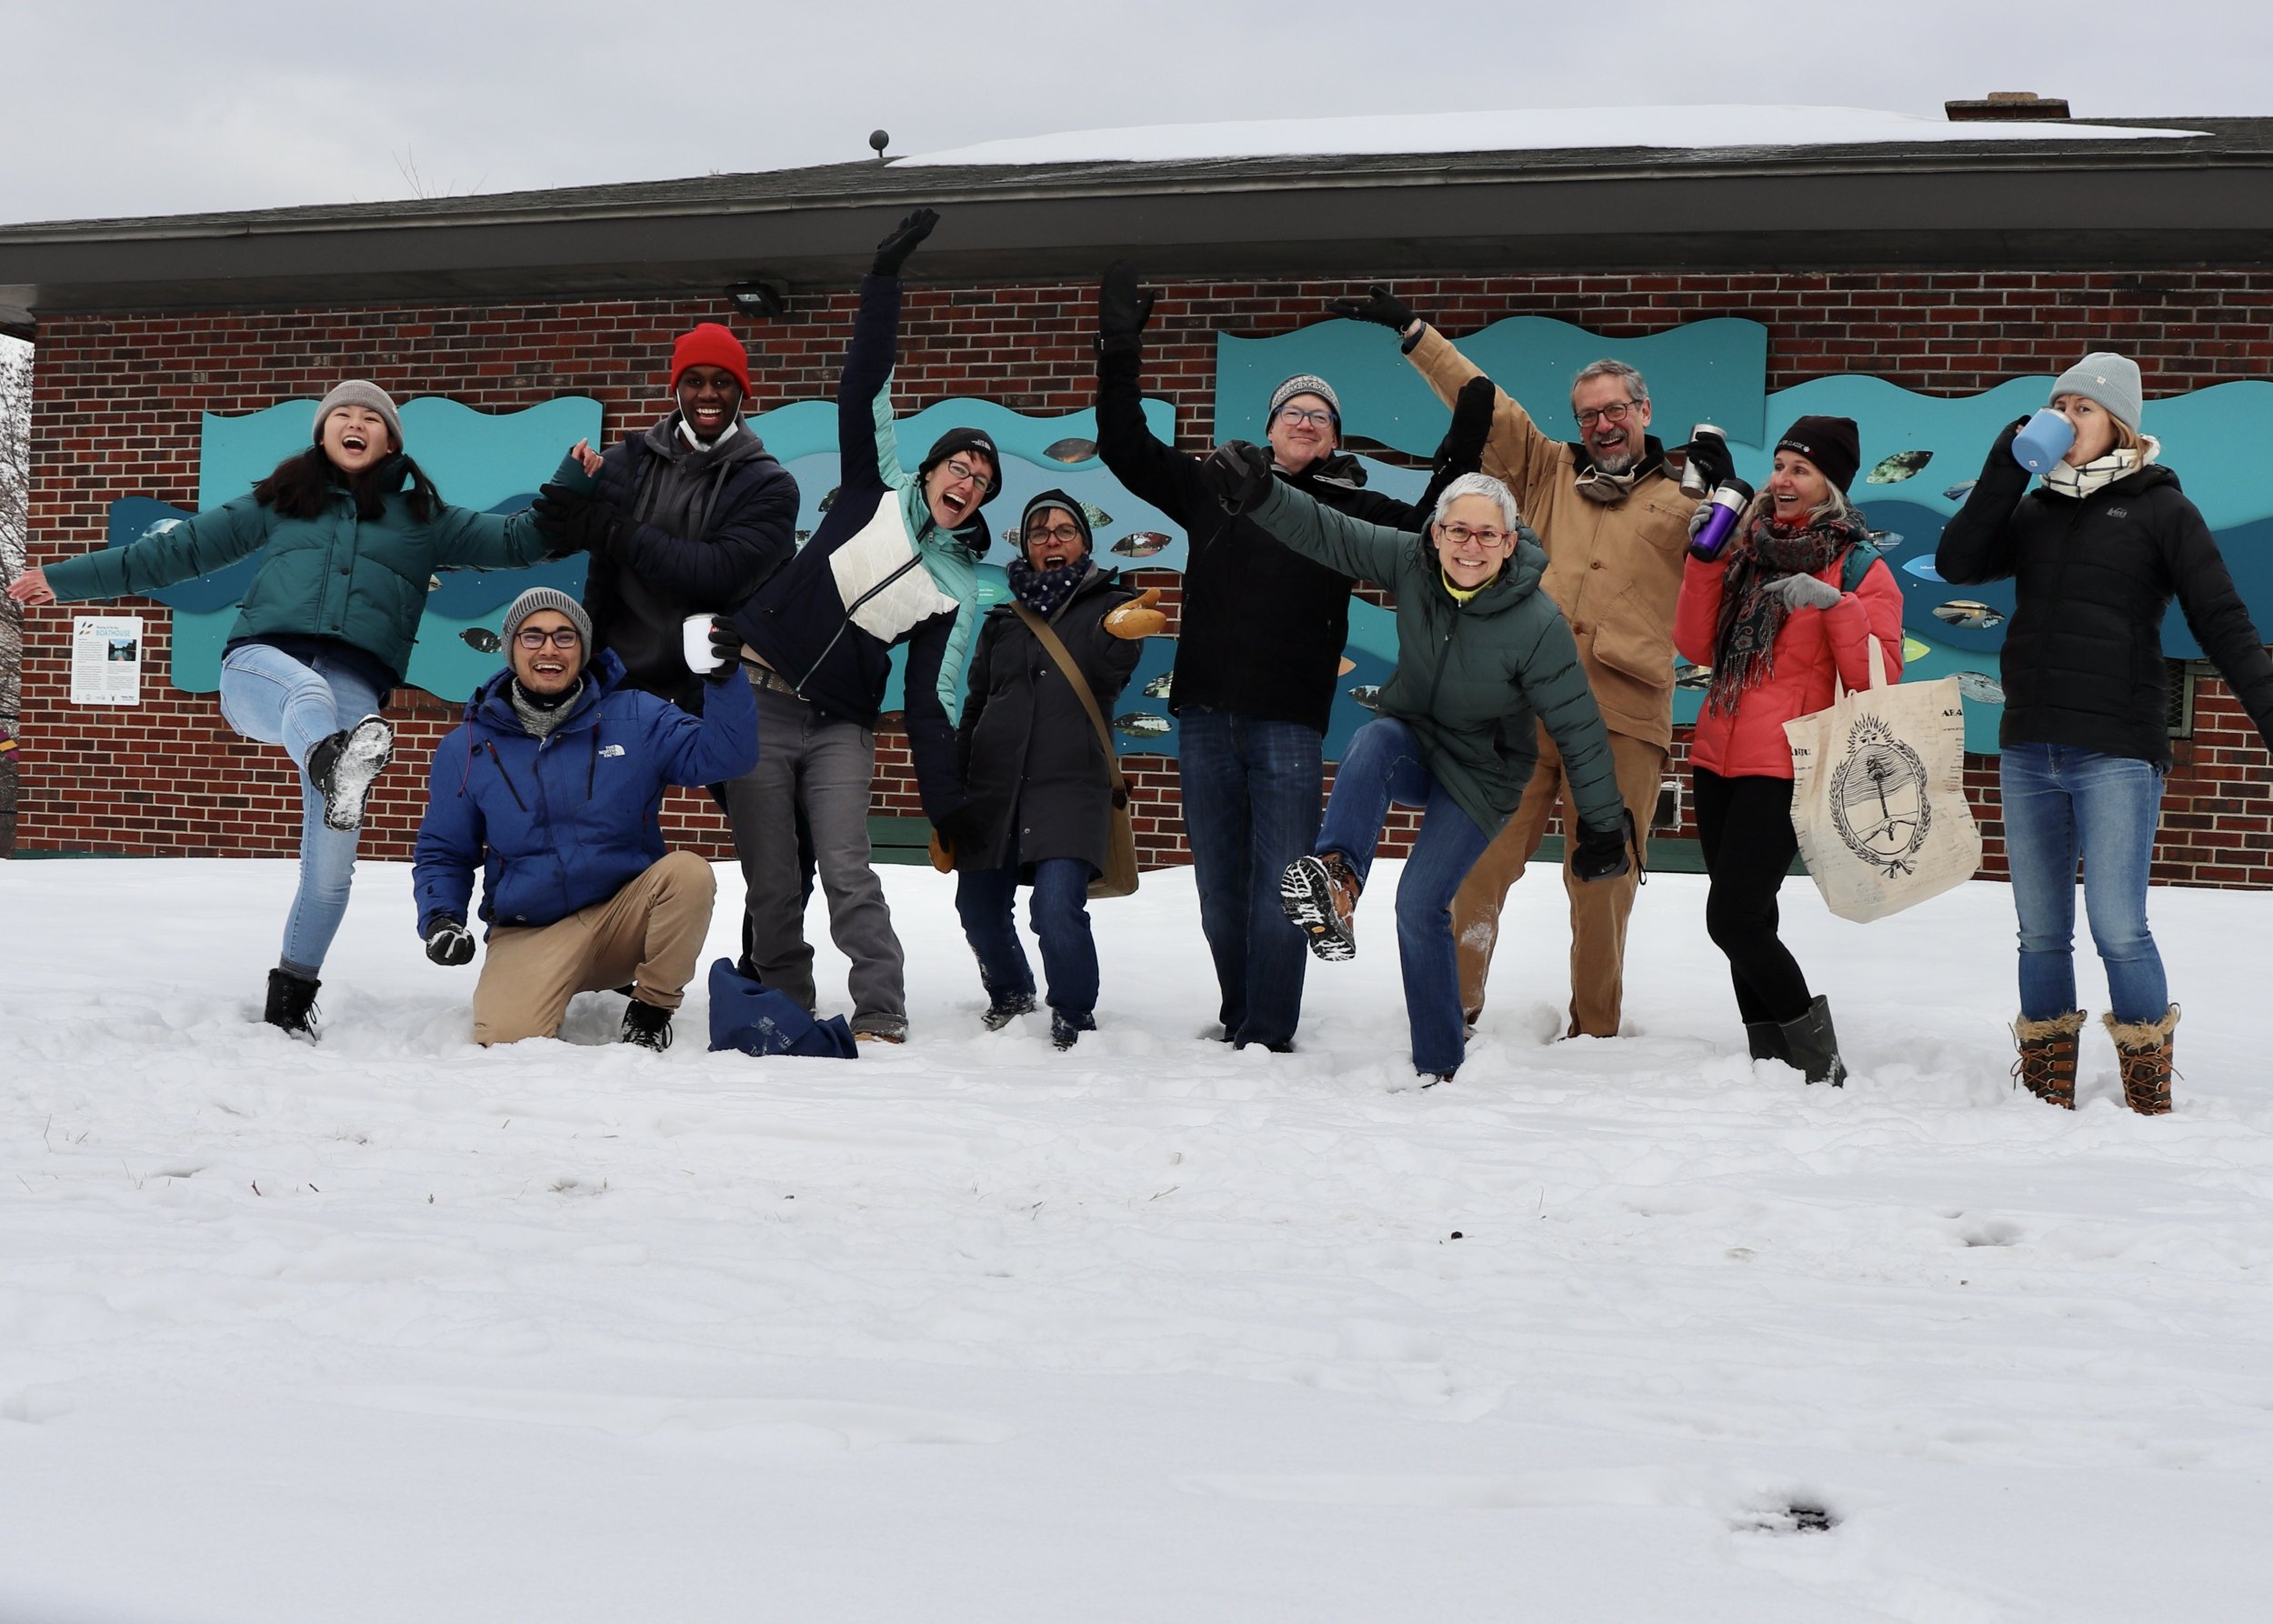  2.1.2022 | MyRWA staff enjoy a winter walk at Blessing of the Bay.  Meet our growing team.  